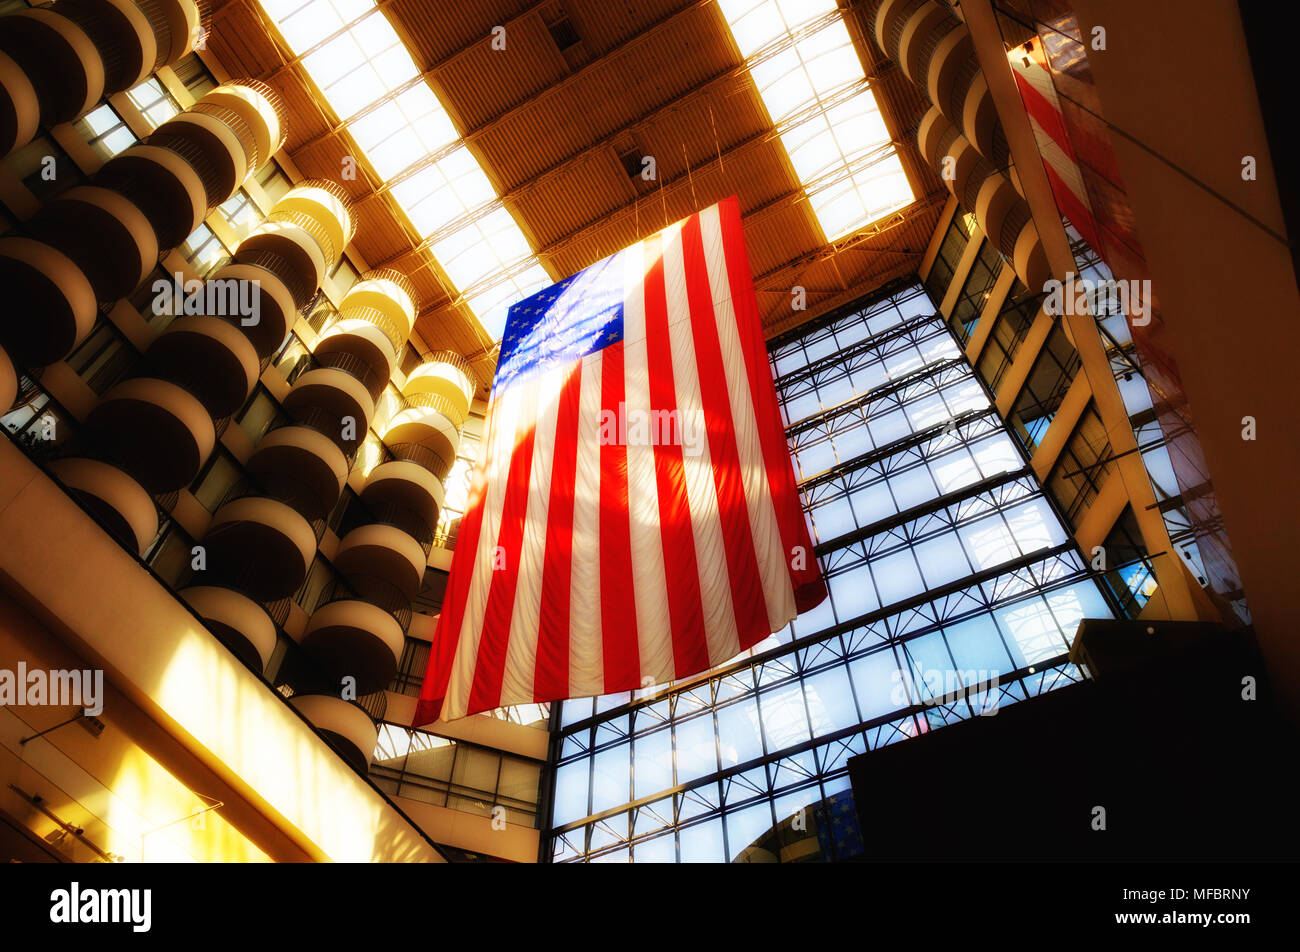 The American flag, or Stars and Stripes hanging in the Houston Galleria shopping mall, Houston Texas USA Stock Photo